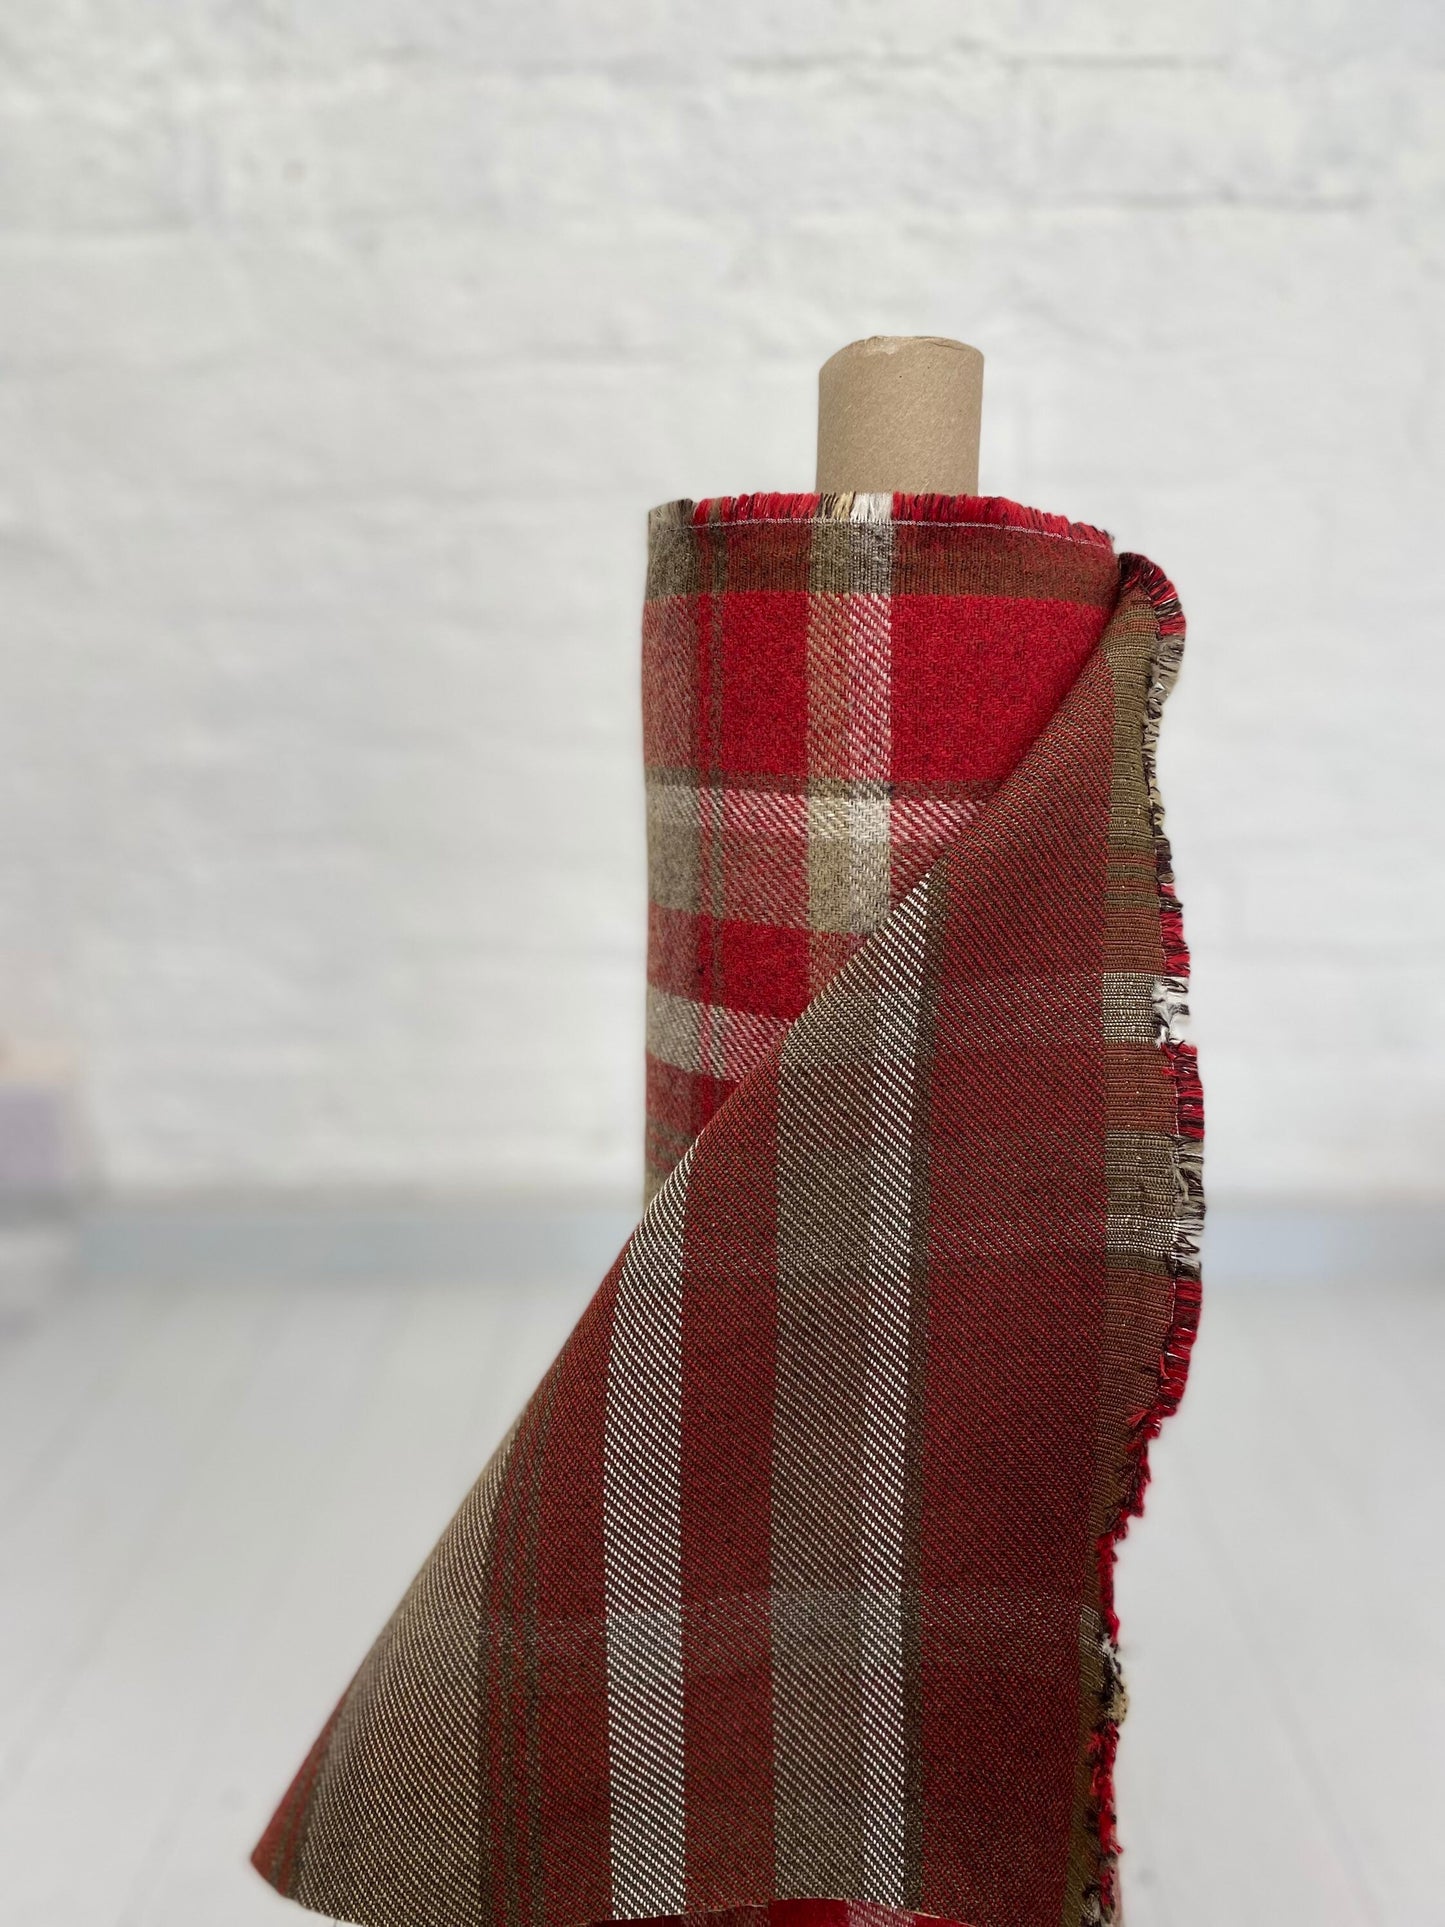 Red wool touch fabric. Balmoral tartan, plaid,check upholstery weight fabric suitable for curtains,cushions,blinds, upholstery and much more